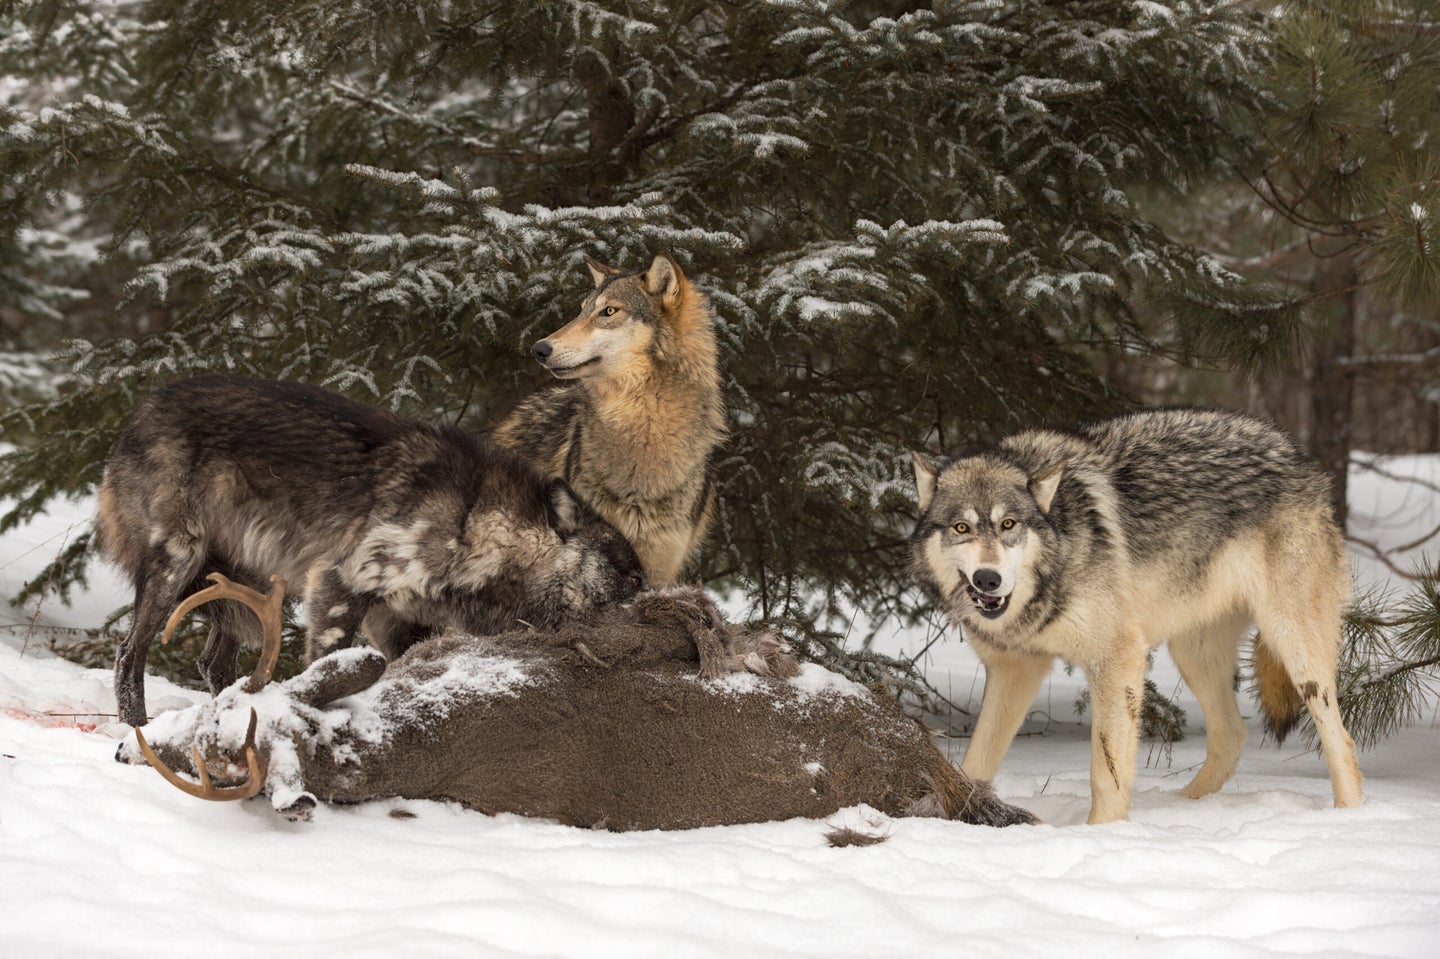 A pack of gray wolves feed on a whitetail deer carcass in winter